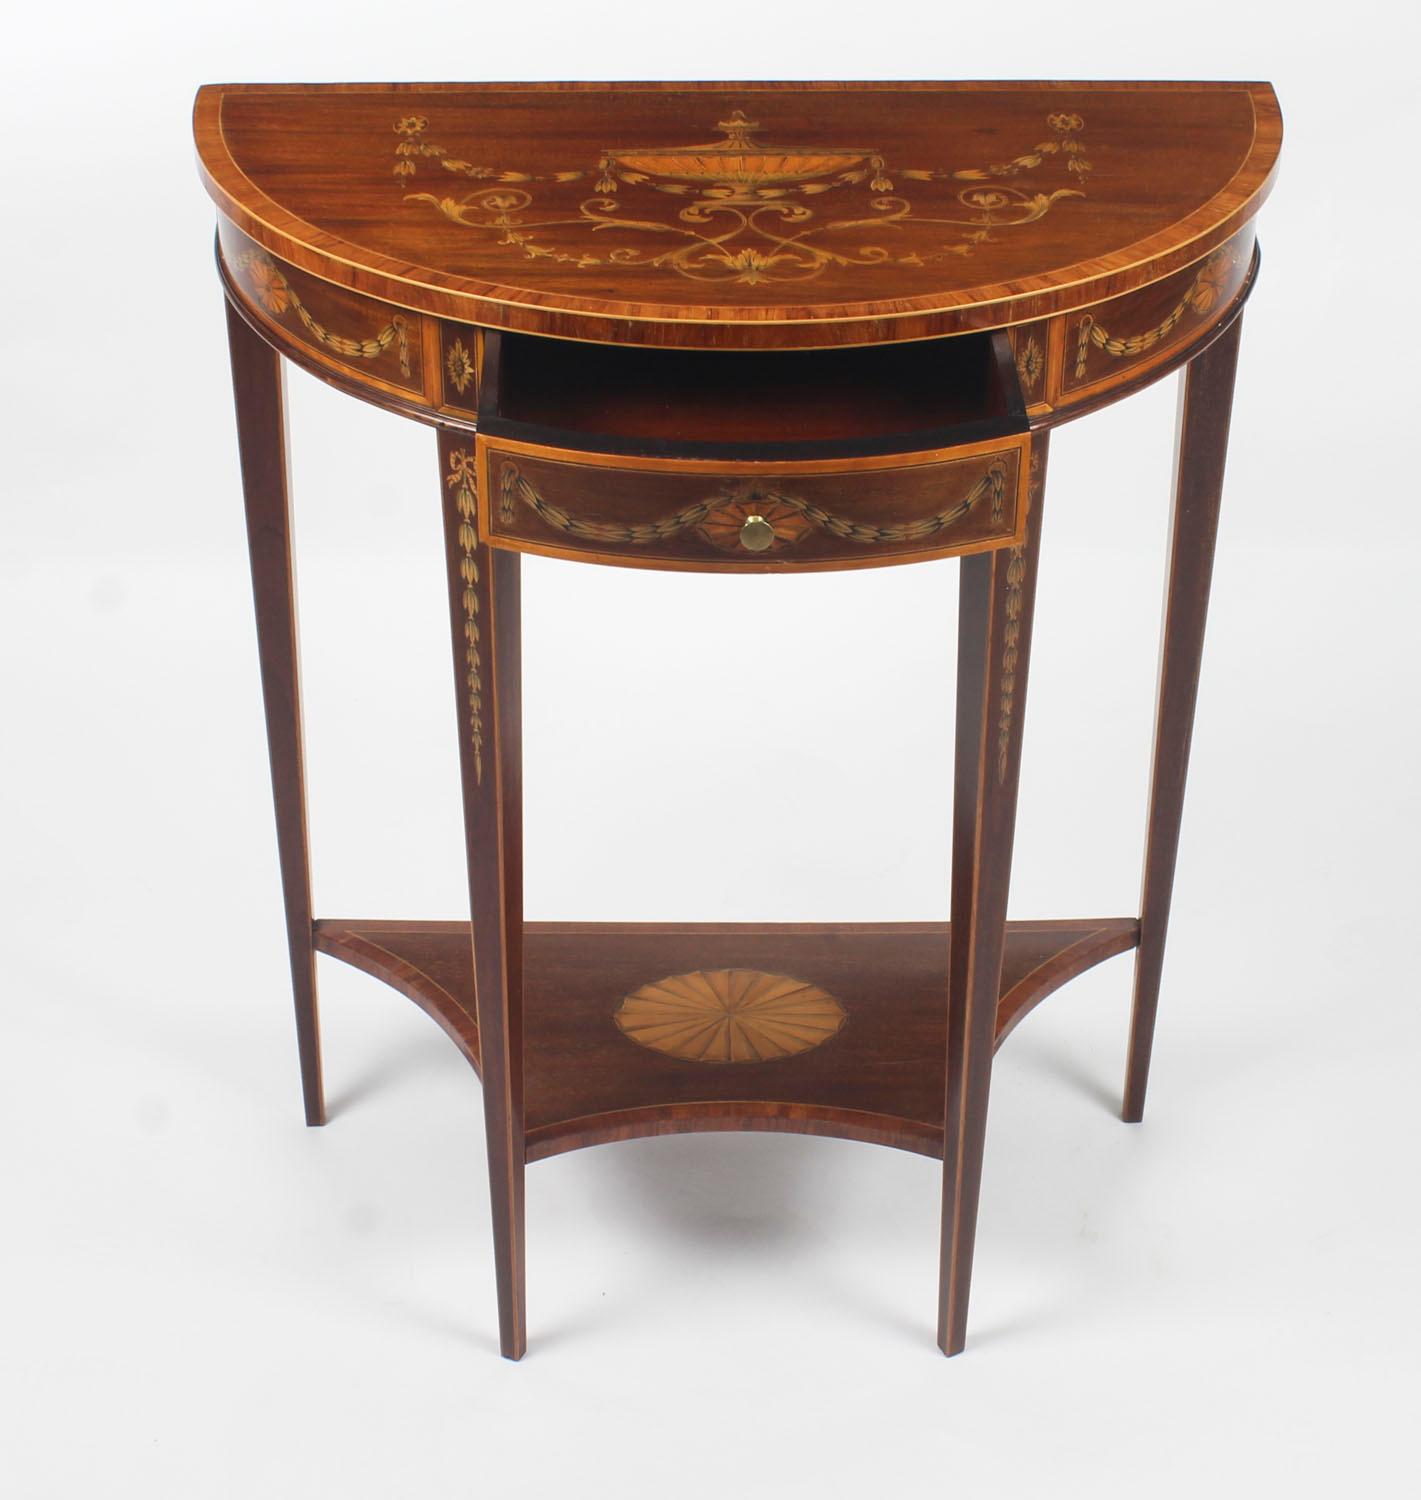 Antique Regency Revival Marquetry Console Table, 19th Century 3